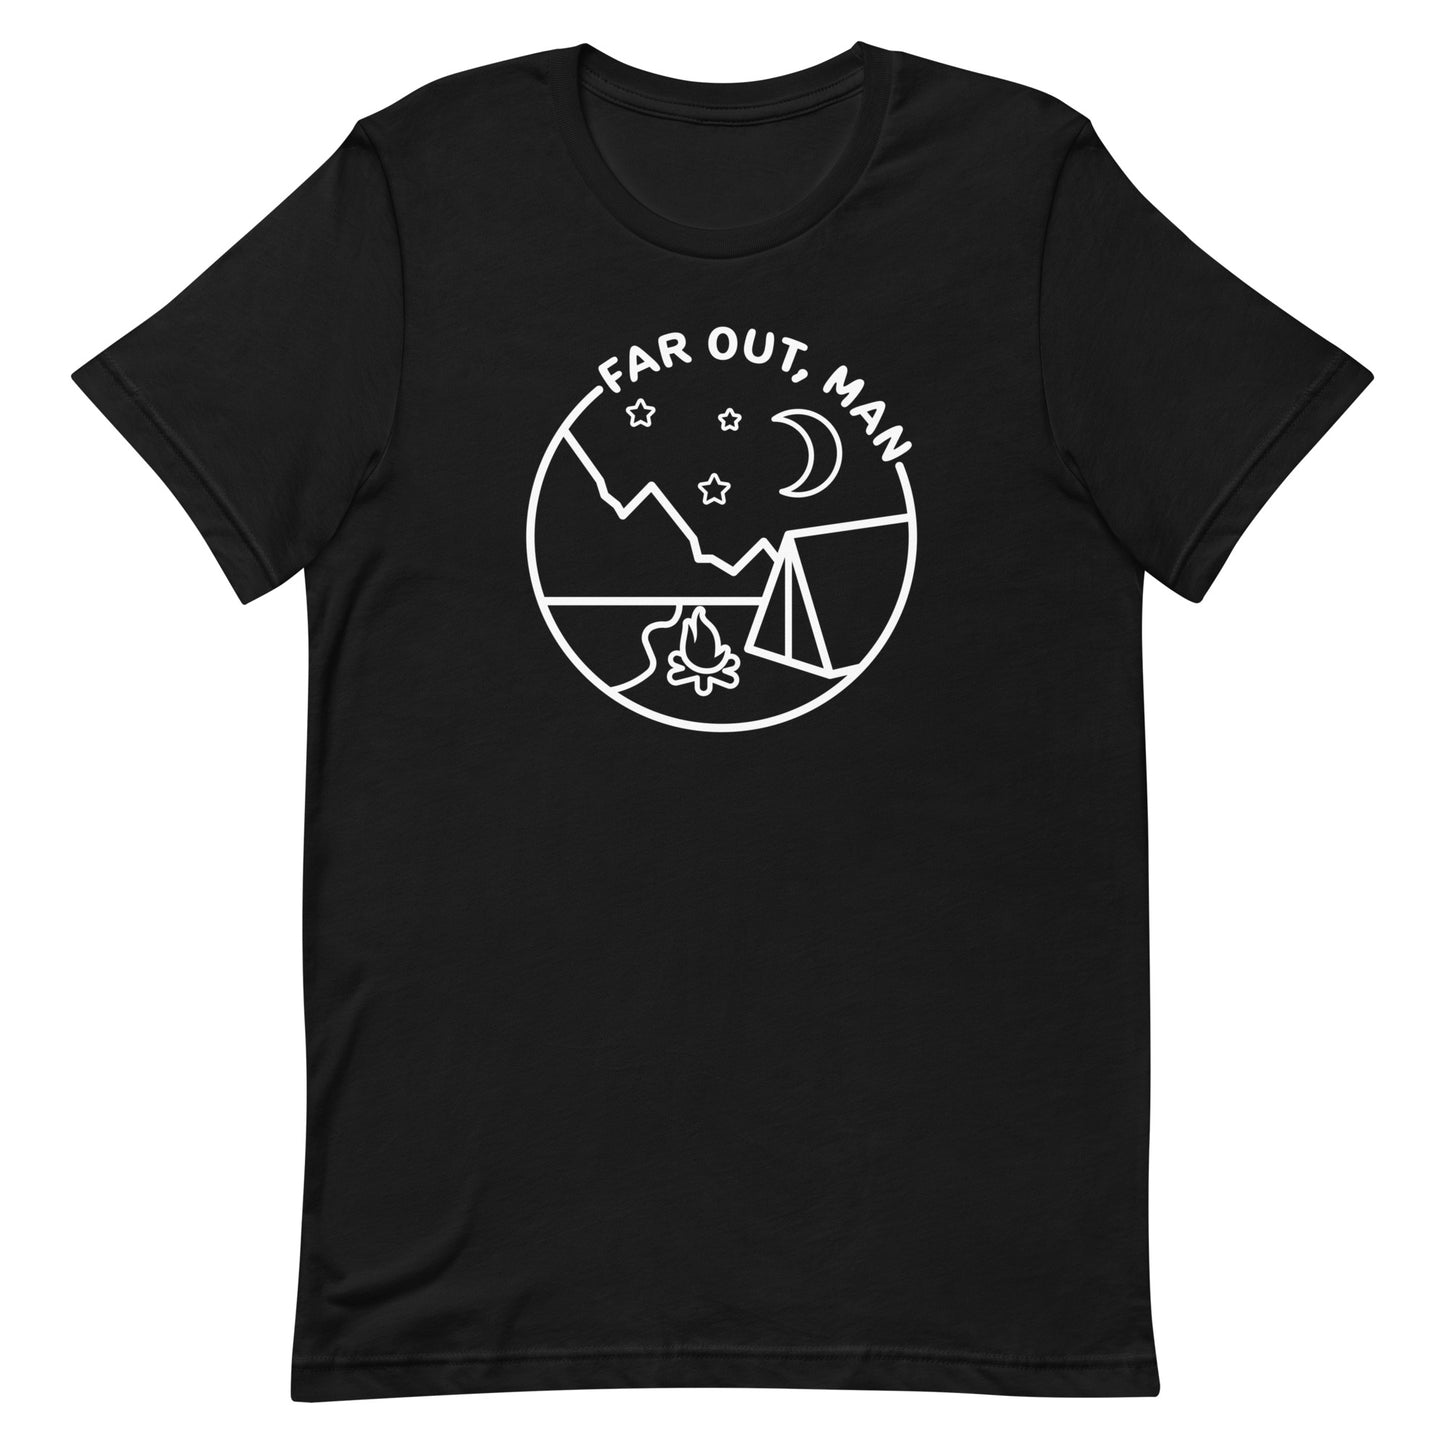 A black t-shirt with a white lineart graphic of a tent and campfire under a night sky. Text in an arc above the image reads "Far out, man".